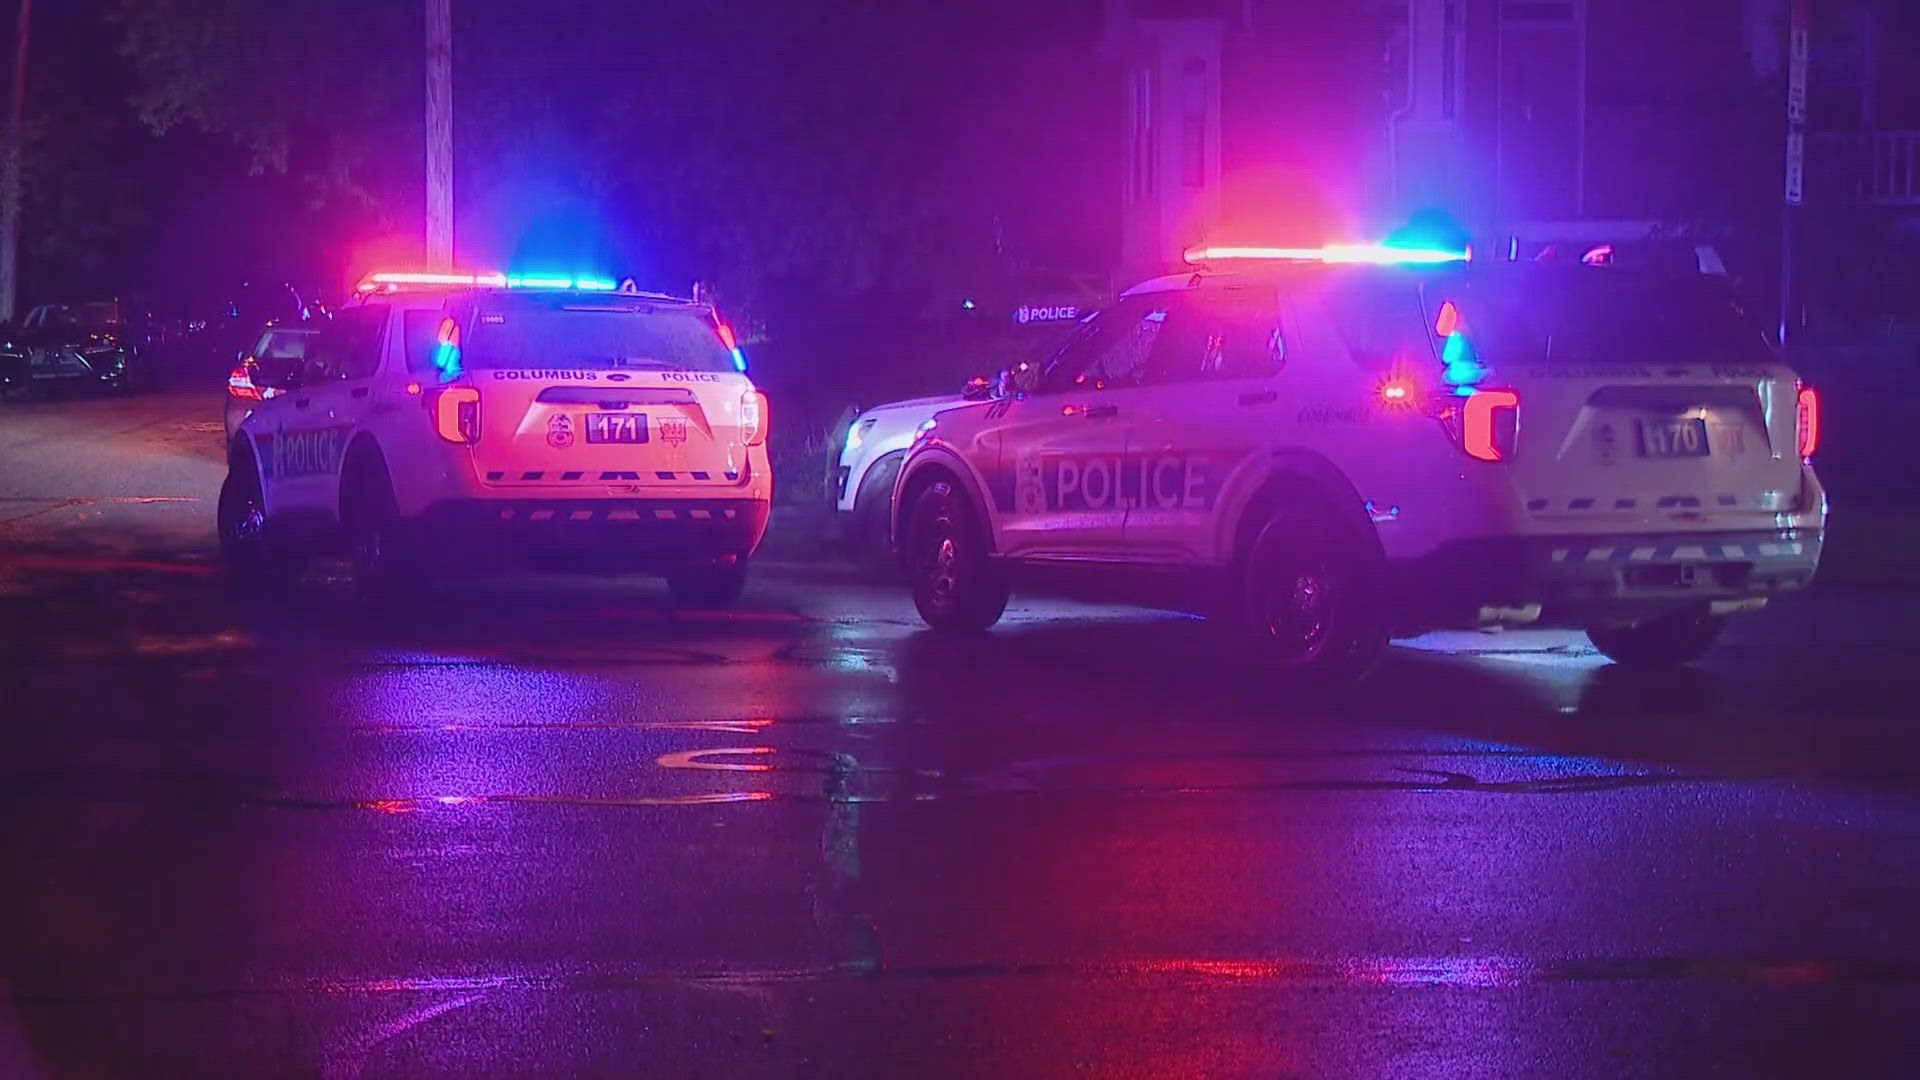 Officers were called to the 400 block of East 13th Avenue just after 8:30 p.m. for a shooting.